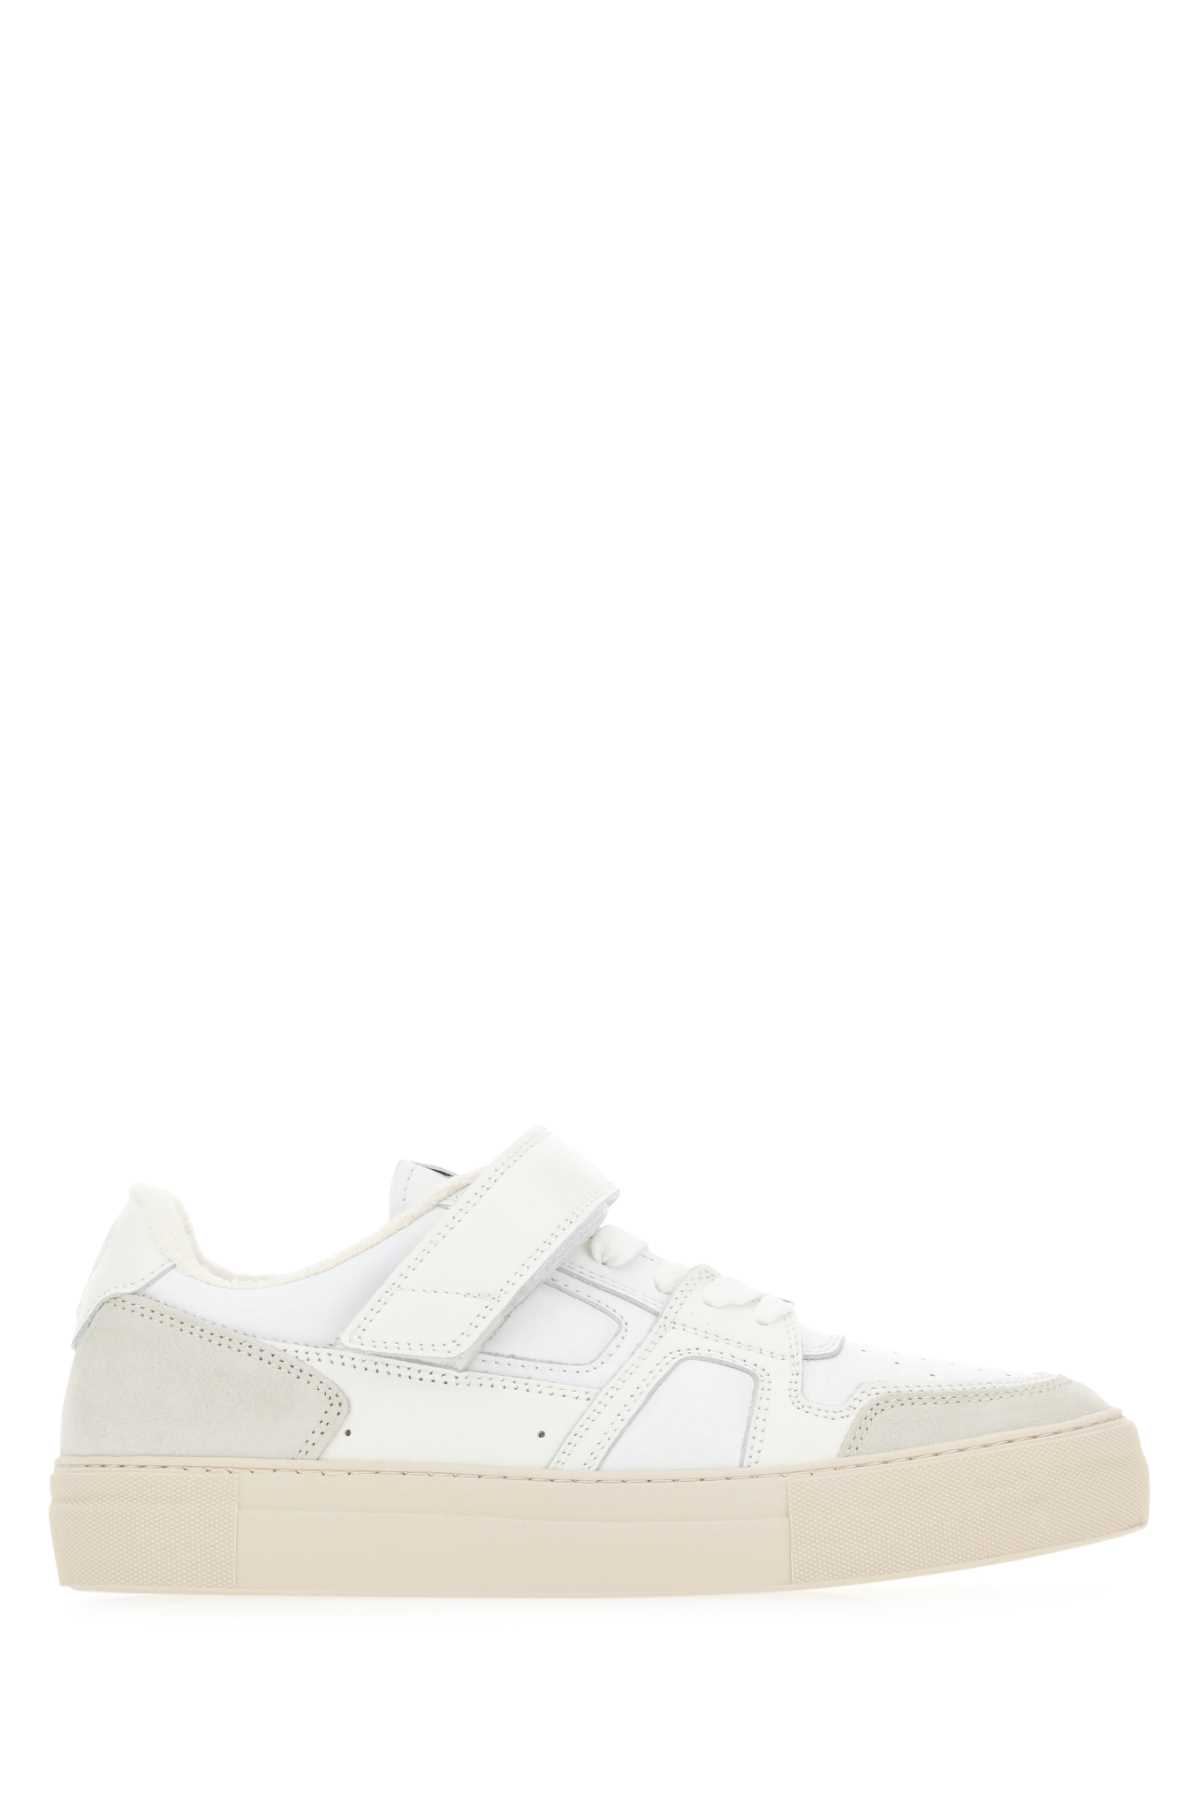 Two-tone Leather And Suede Ami Arcade Sneakers